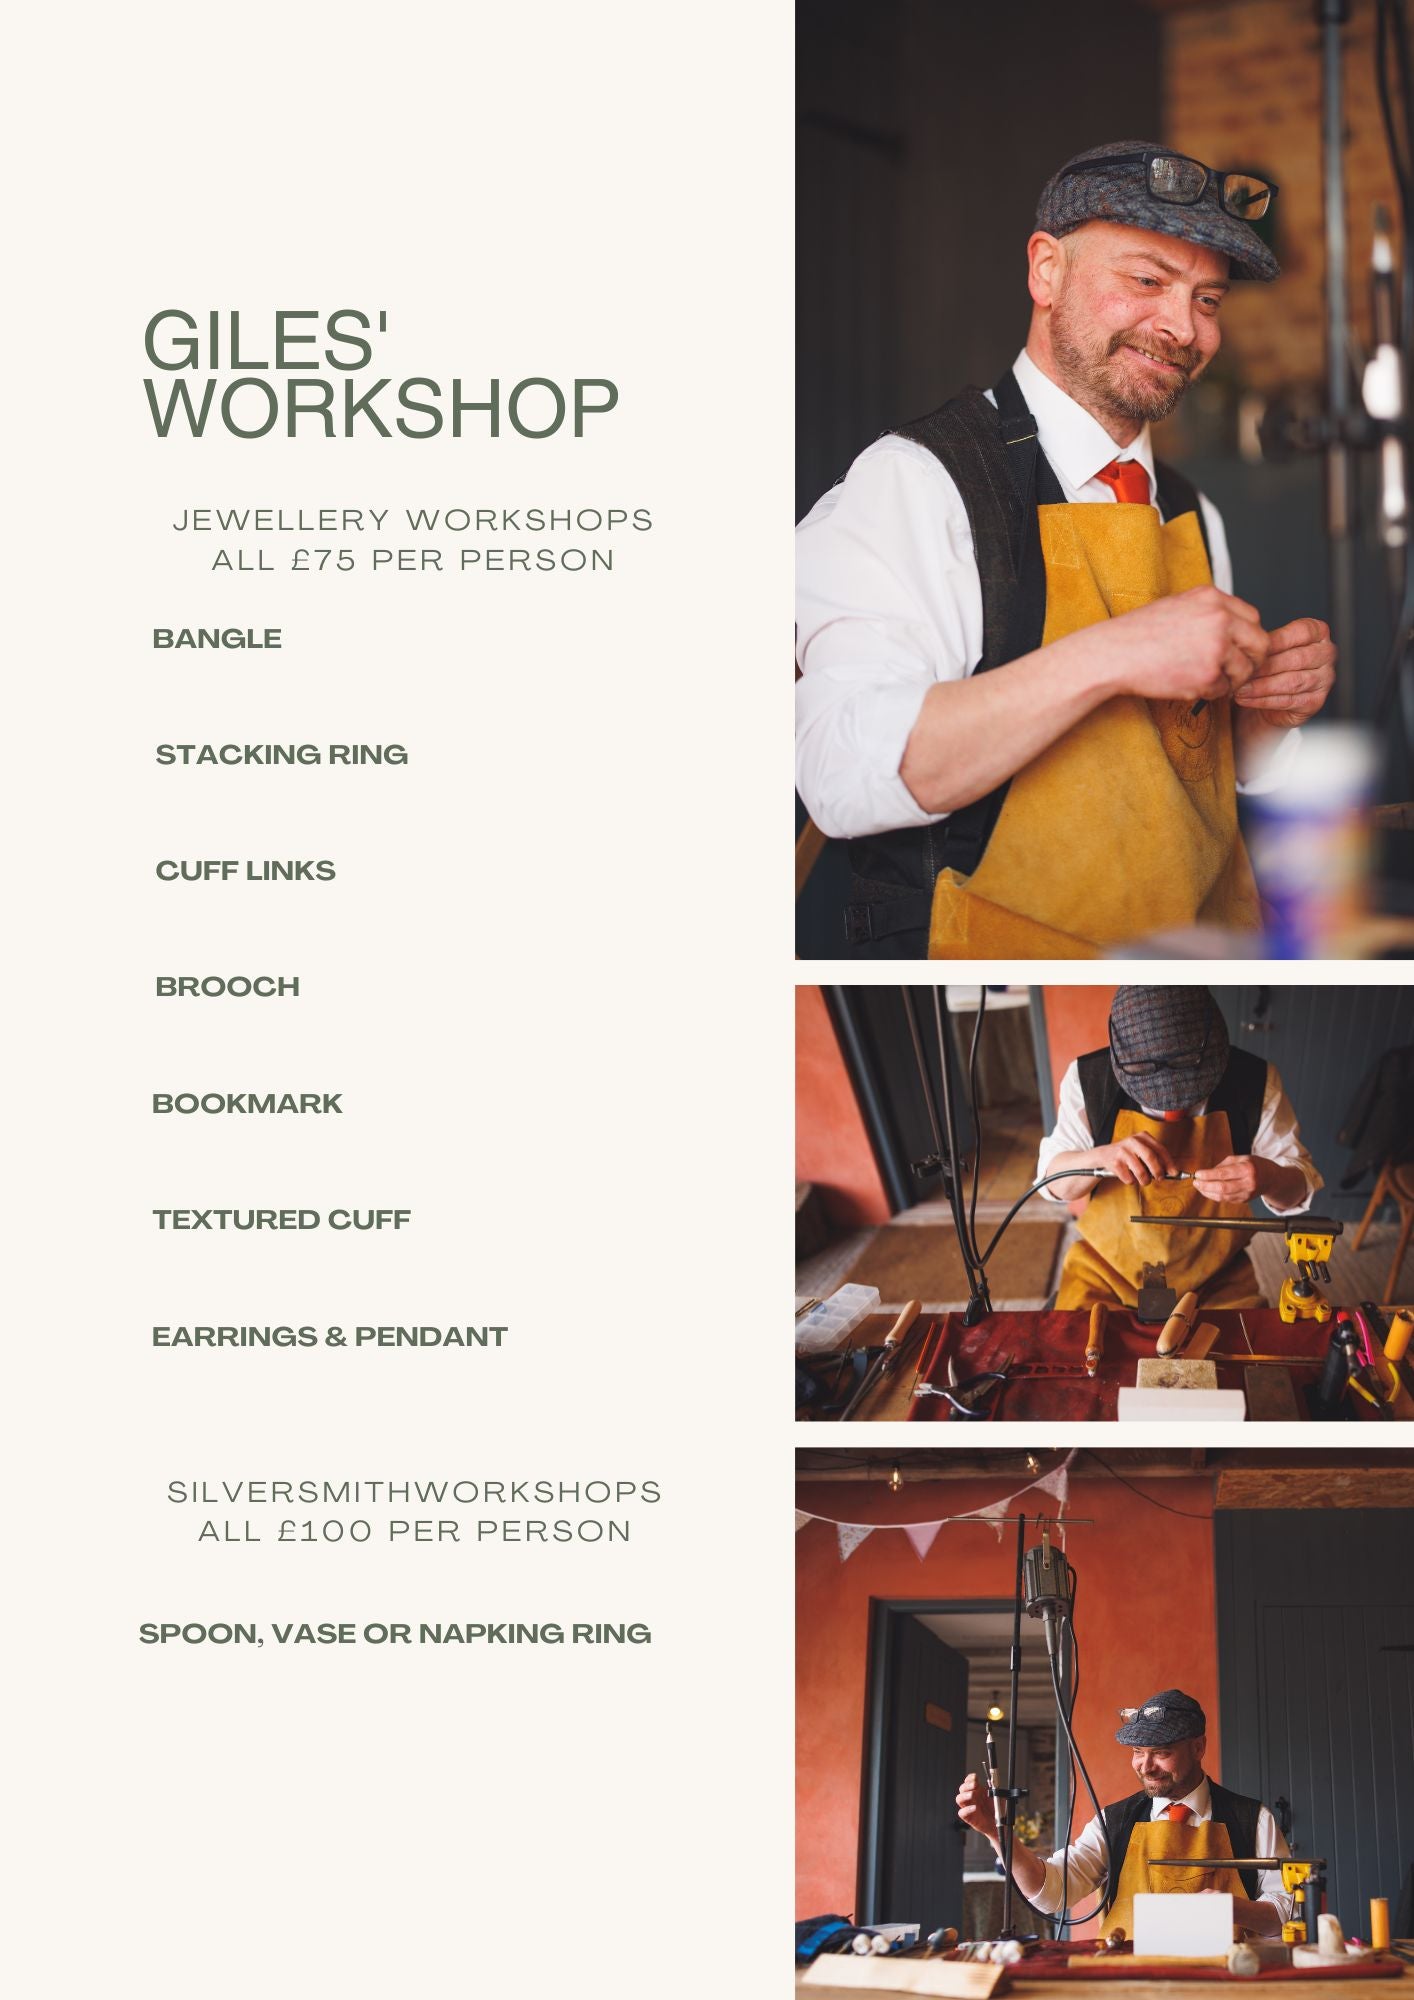 "Captivating craftsmanship: Giles expertly showcases his intricate jewellery making skills, delicately crafting a radiant necklace with precision and artistry."